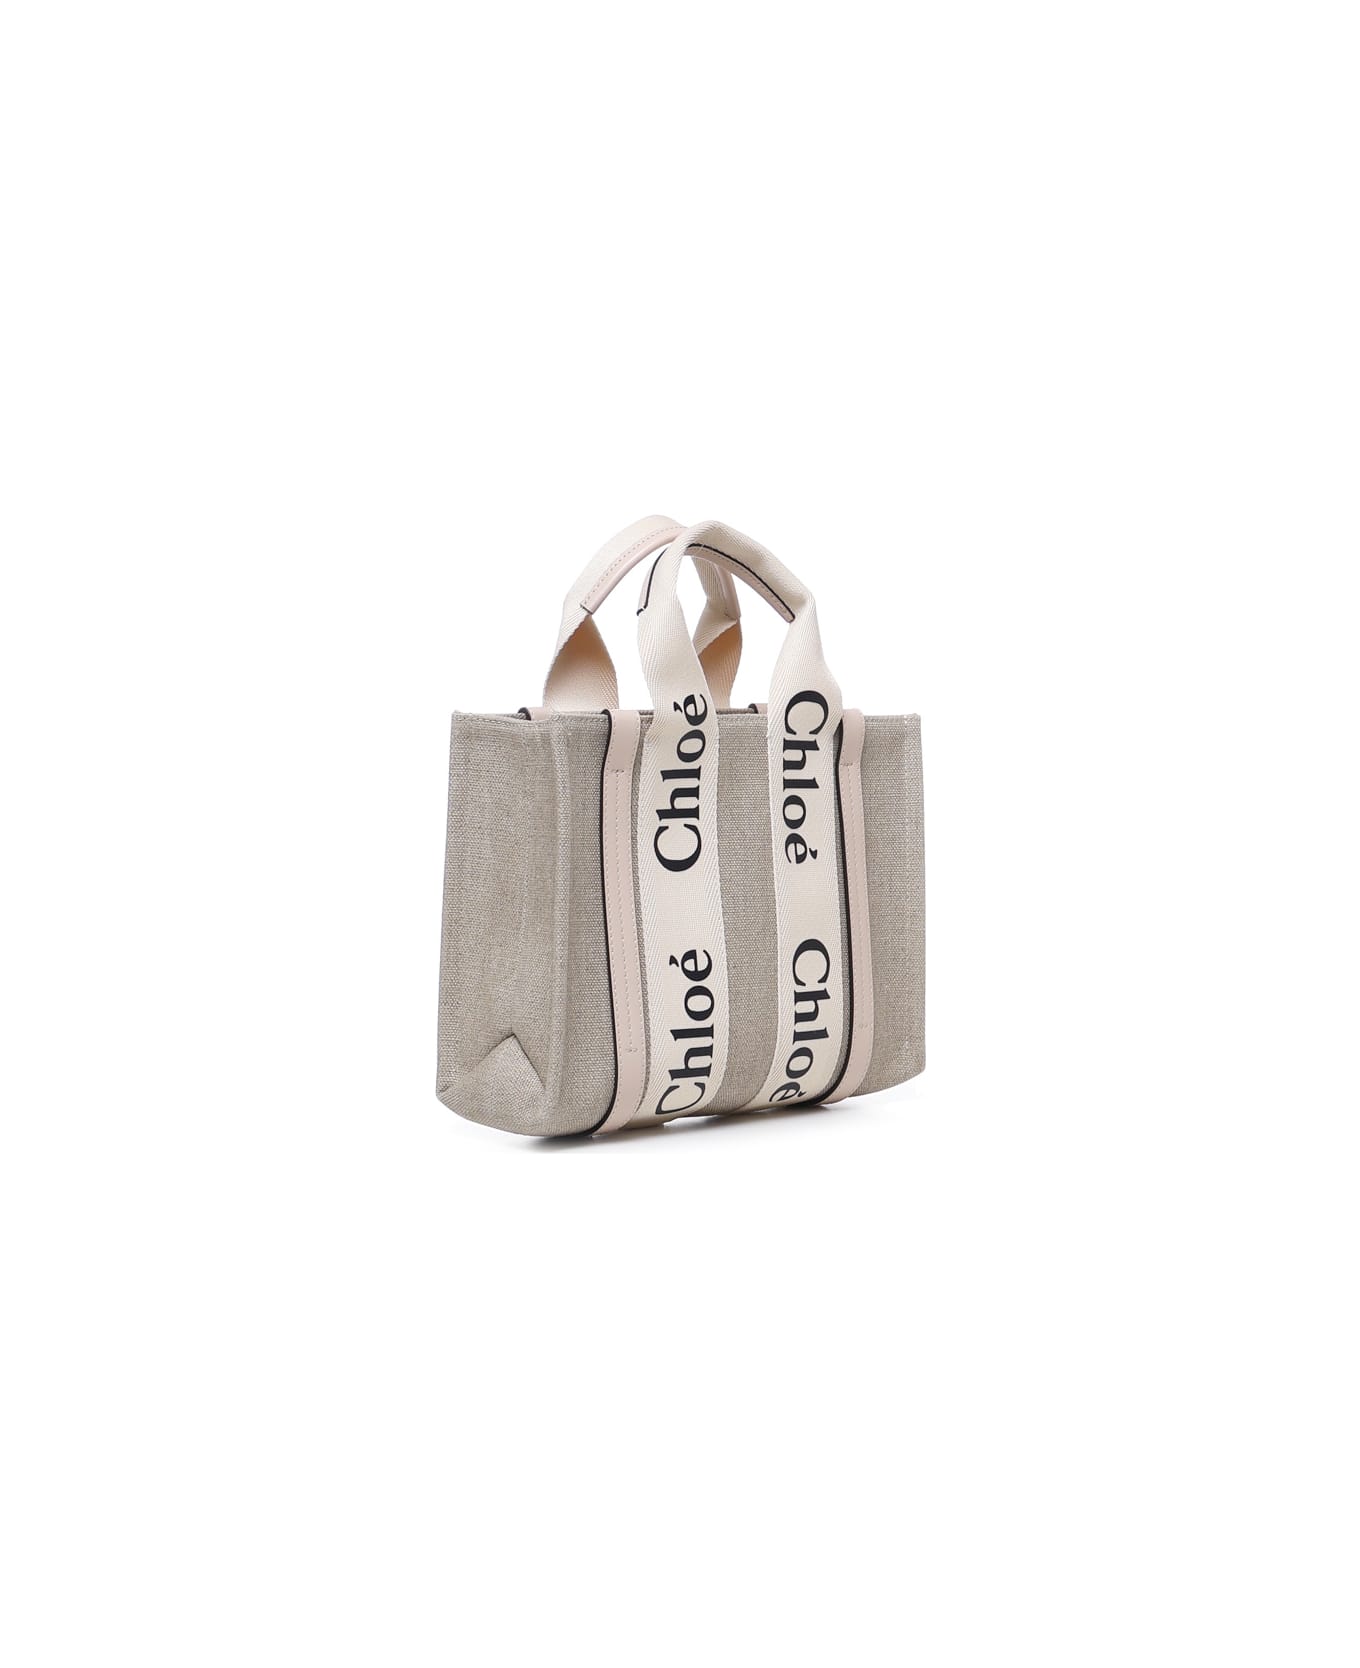 Chloé Small Woody Tote Bag - Cement pink